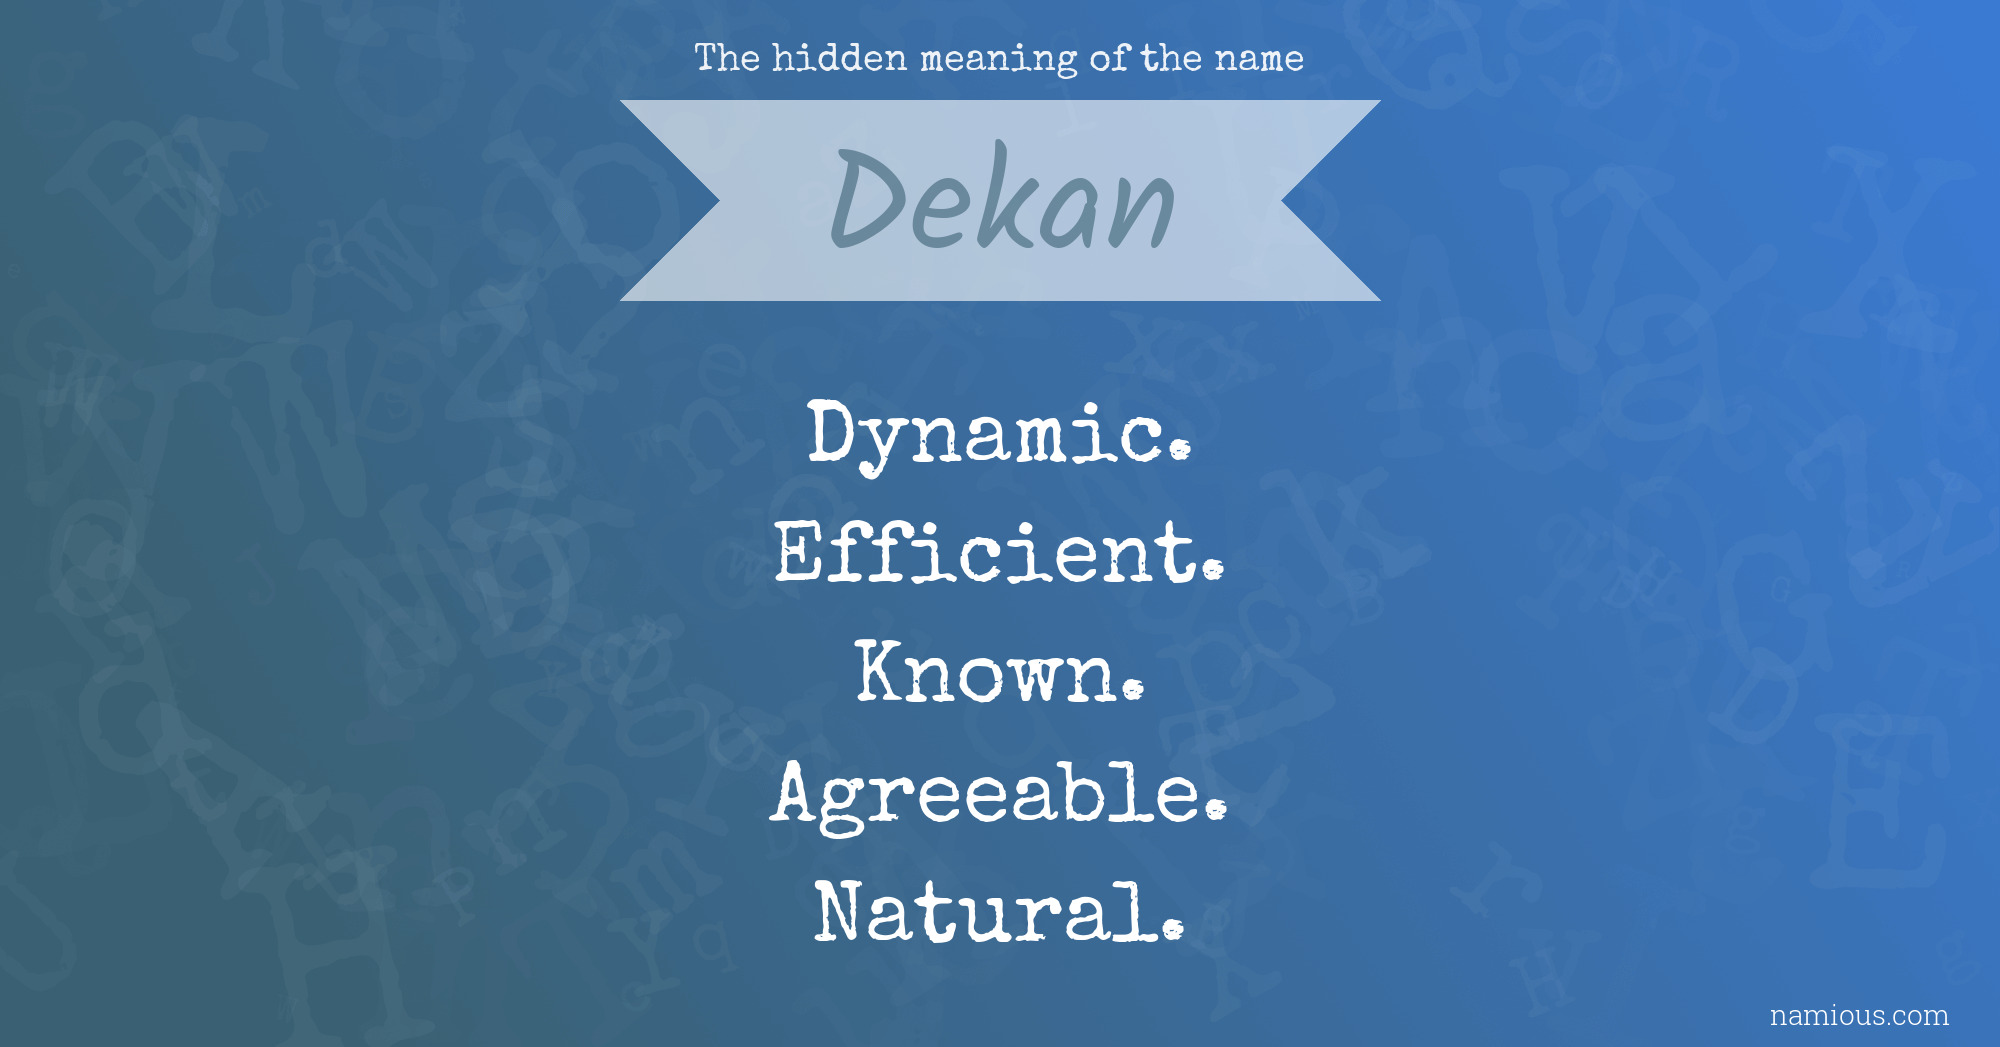 The hidden meaning of the name Dekan